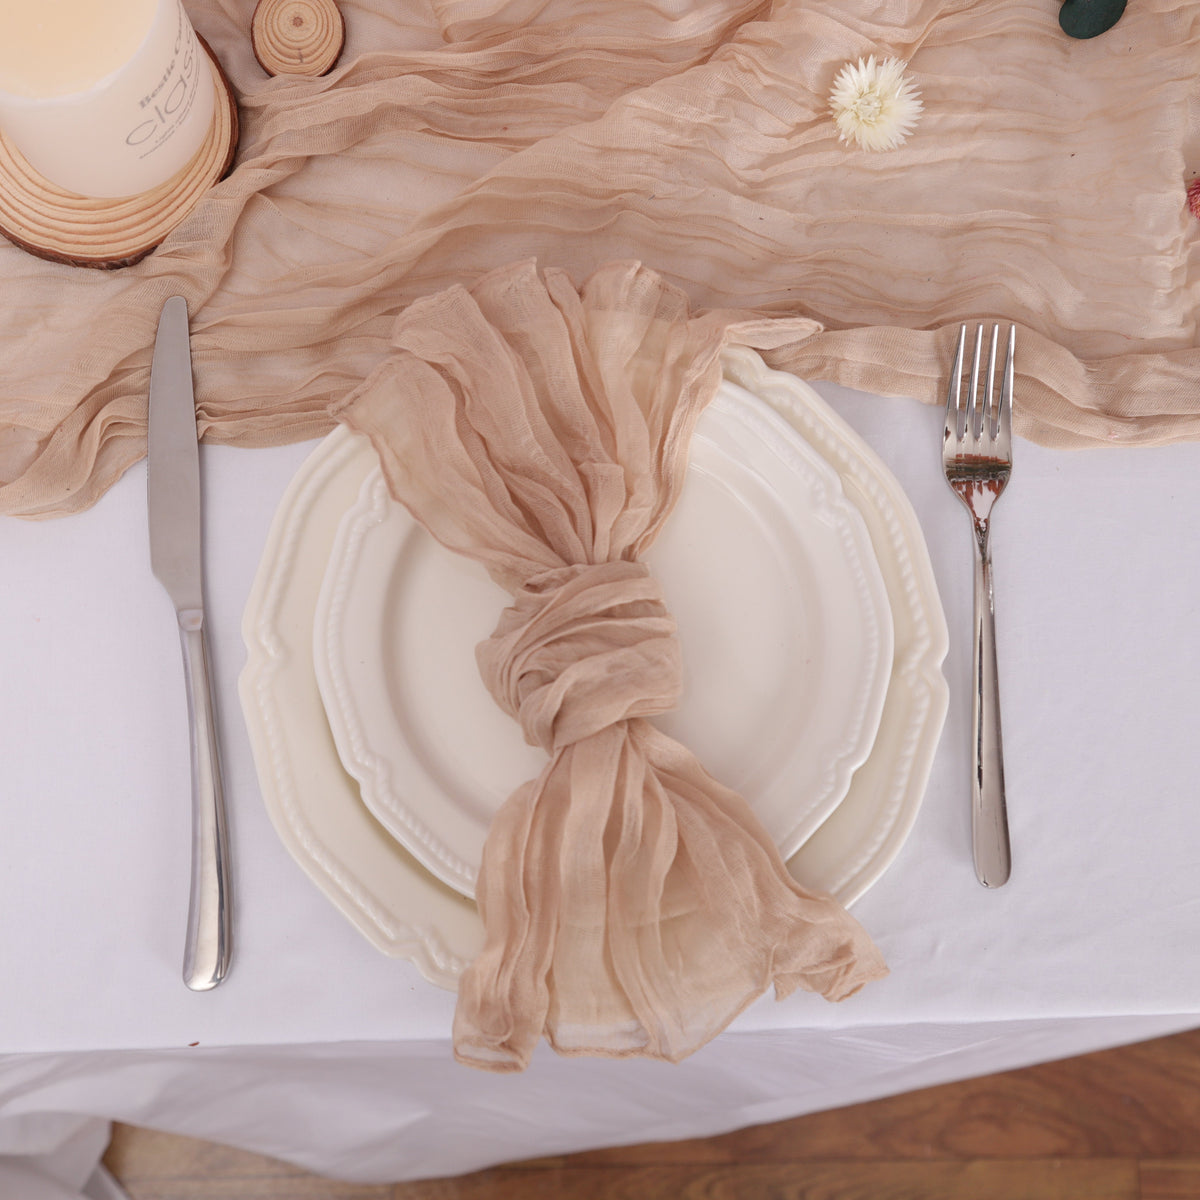 Hire Rustic Gauze Cheesecloth Napkins